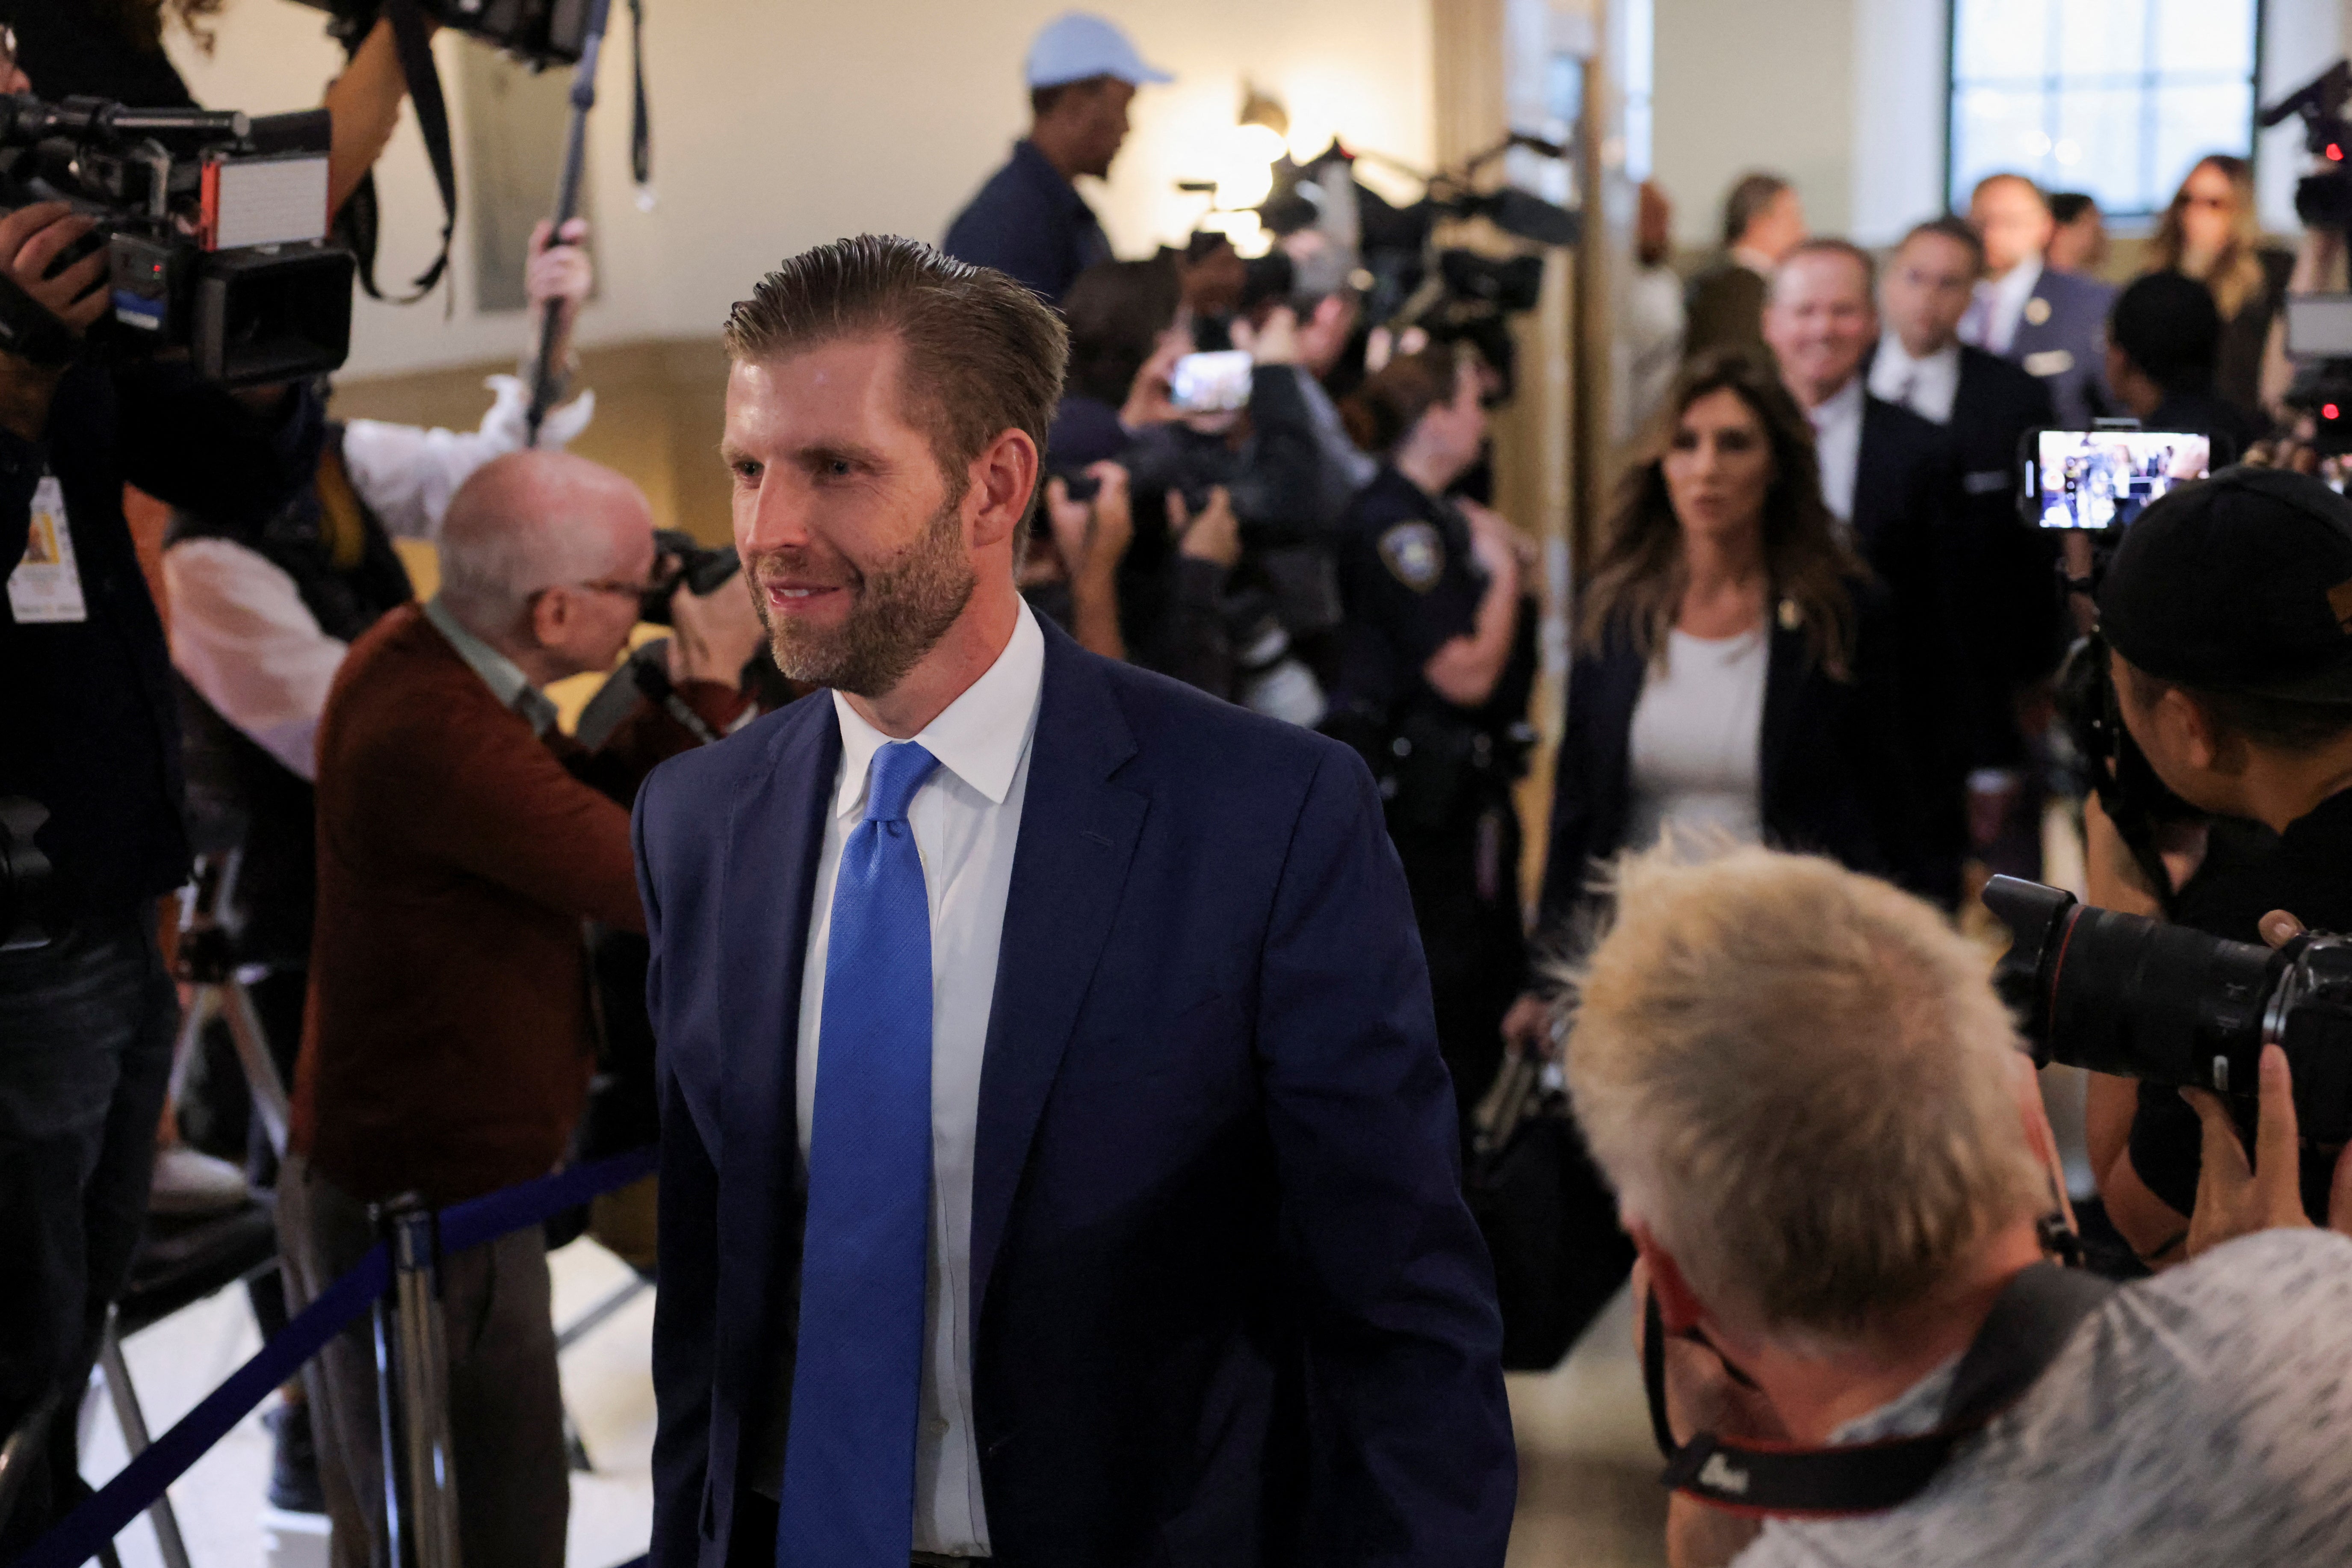 Eric Trump led an initial part of former president Donald Trump’s entourage into court on the first day of New York civil fraud trial